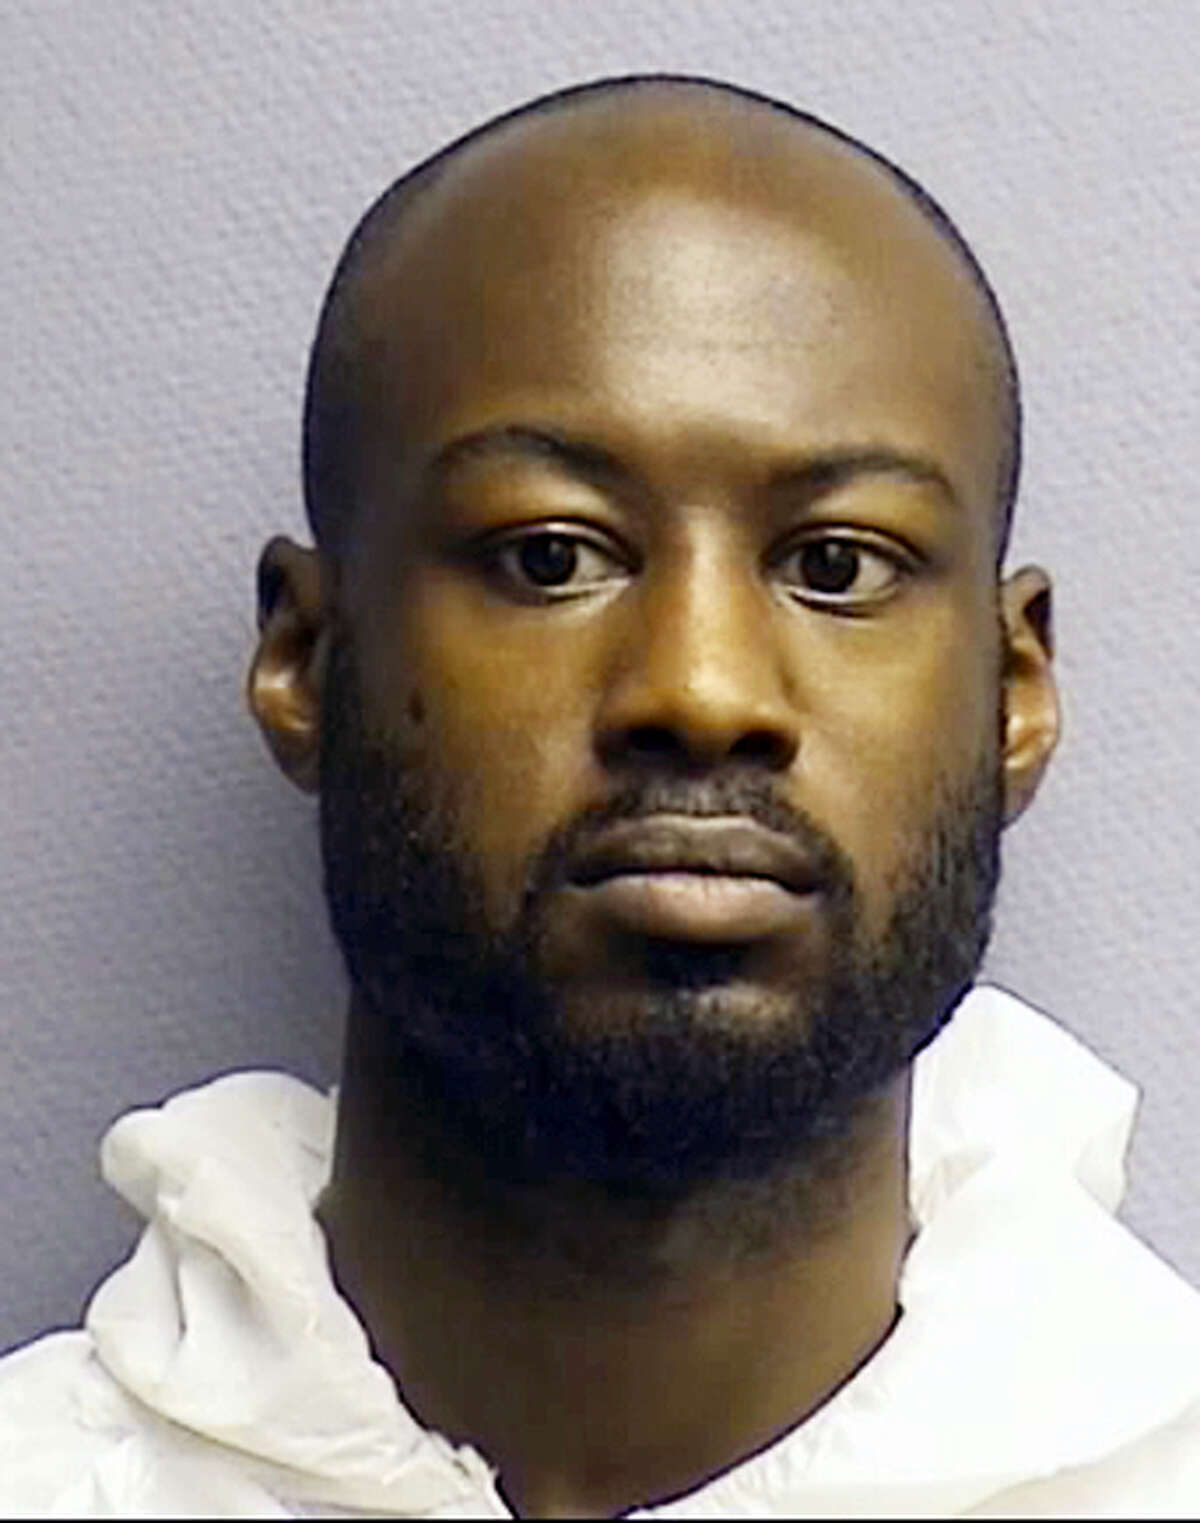 This photo provided by Houston Police Department shows Andre Timothy Jackson, Jr. Jackson has been charged with murder in the stabbing death of an 11-year-old who was walking home from school last month, police said Saturday, June 4, 2016. Jackson Jr. was arrested Friday afternoon at the Salvation Army in downtown Houston and charged later in the day, Mayor Sylvester Turner said at a news conference Saturday.